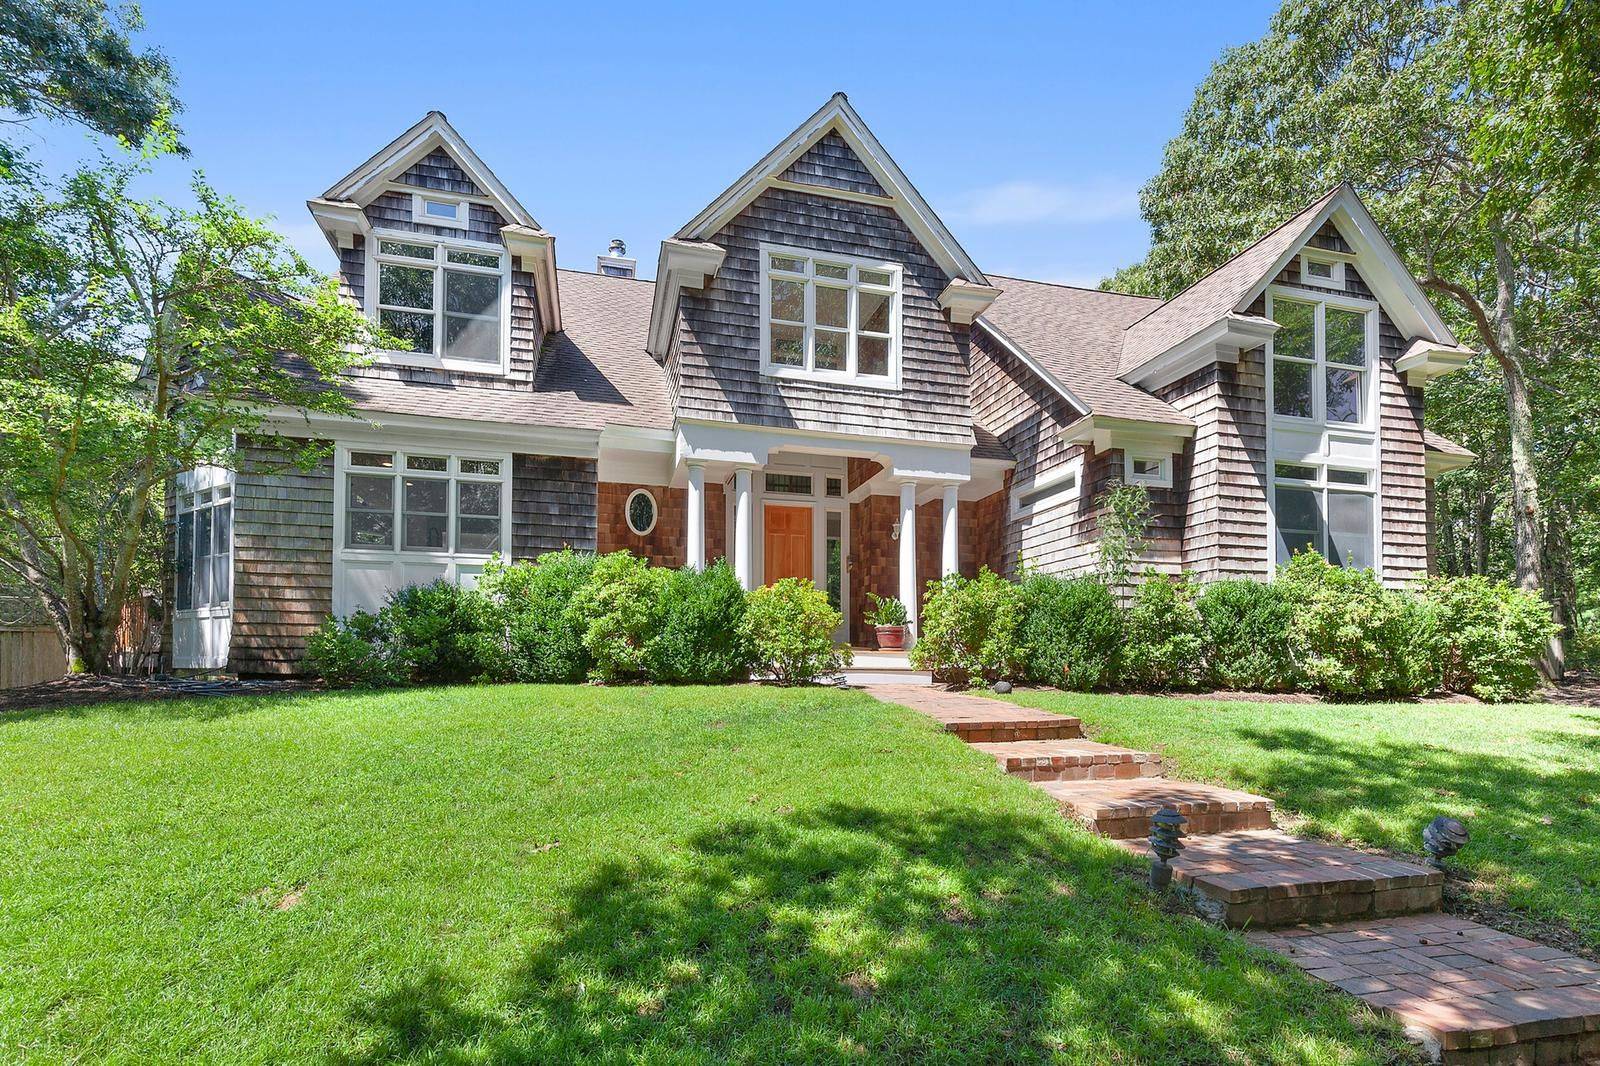 EAST HAMPTON ON 5.5 acres with TENNIS & BBALL COURTS